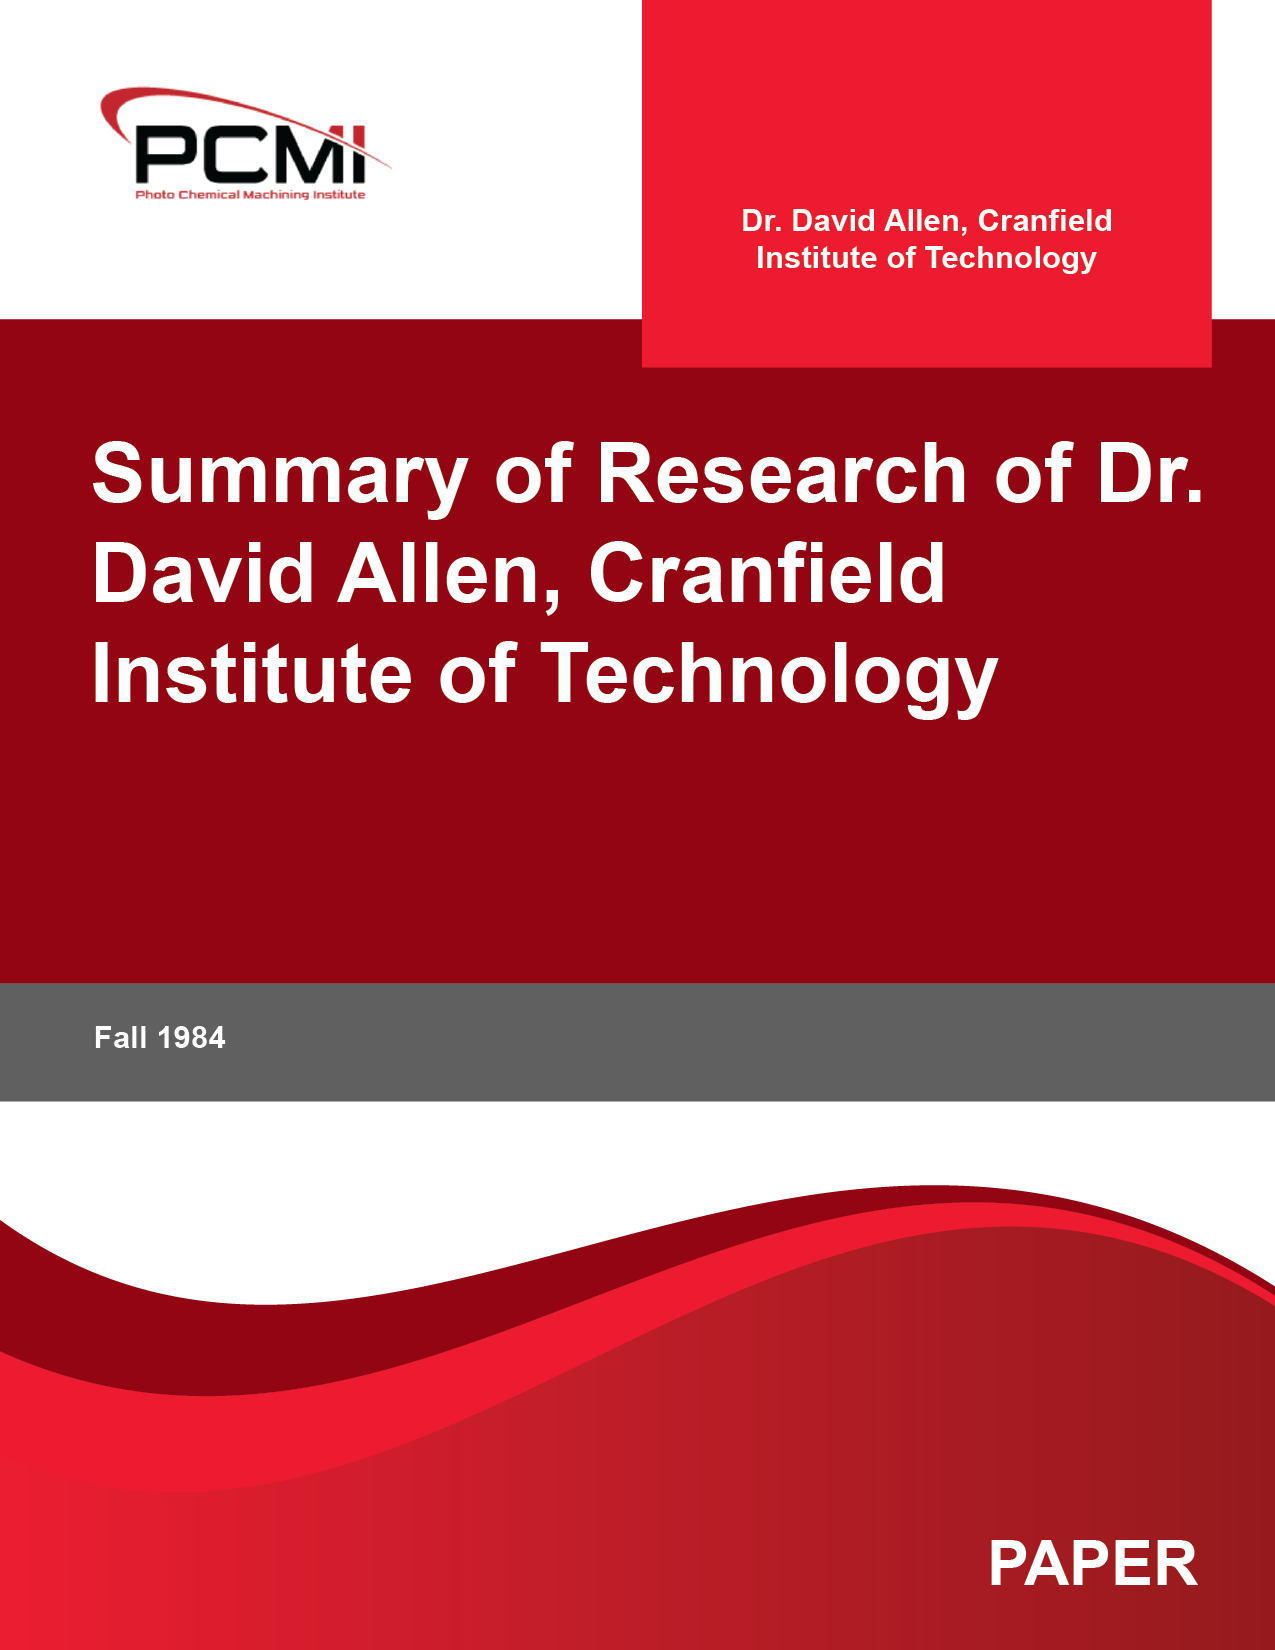 Summary of Research of Dr. David Allen, Cranfield Institute of Technology